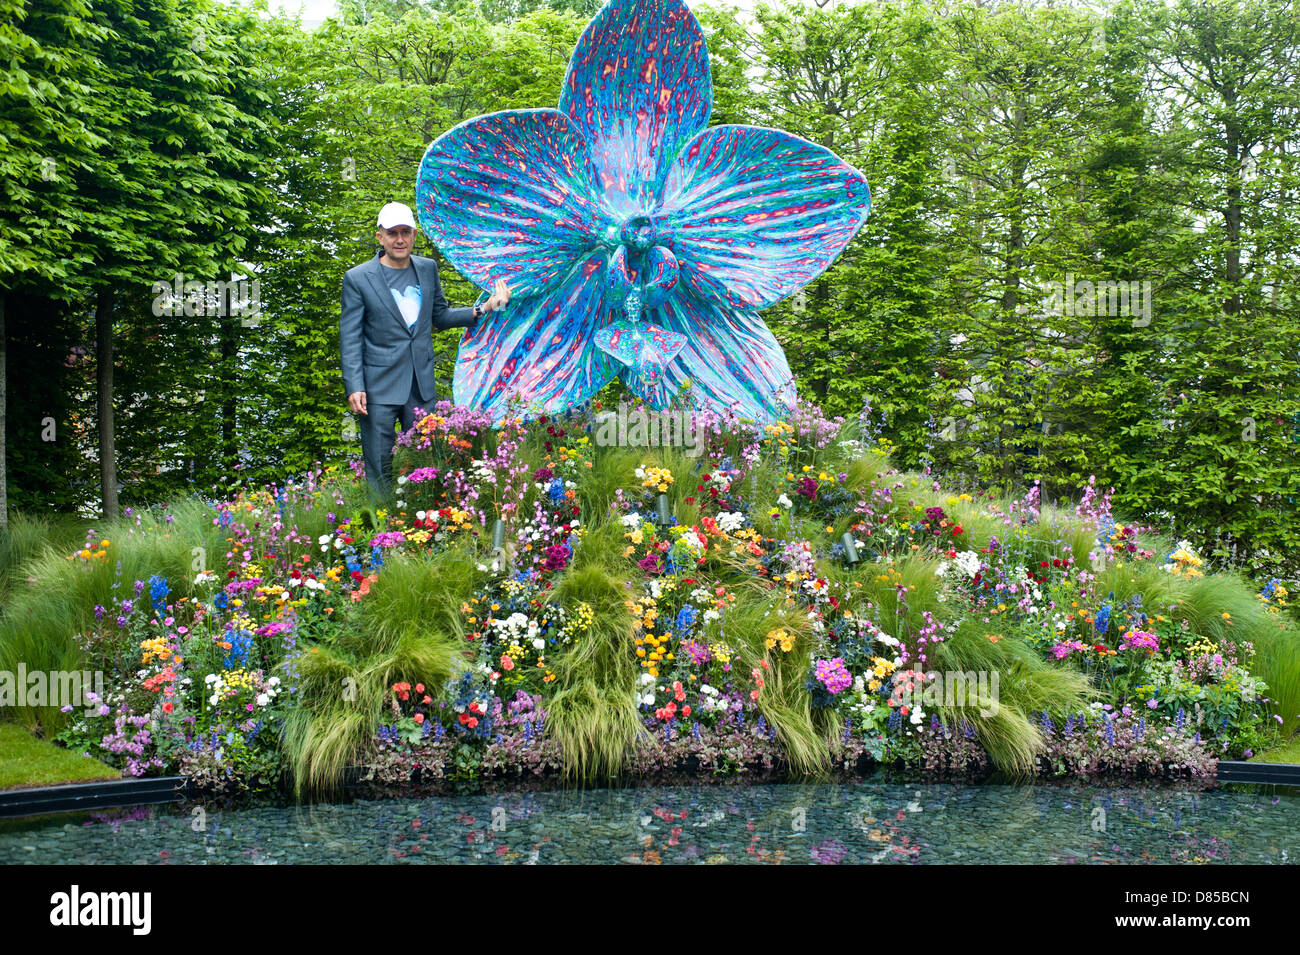 London, UK - 20 May 2013: Artist Marc Quinn  unveils his new sculpture that will be auctioned by Sotheby's as part of the RHS Centenary appeal to raise £1M to support the next generation of horticulturistsduring the RHS Chelsea Flower Show 2013 edition press day. Credit: Piero Cruciatti/Alamy Live News Stock Photo